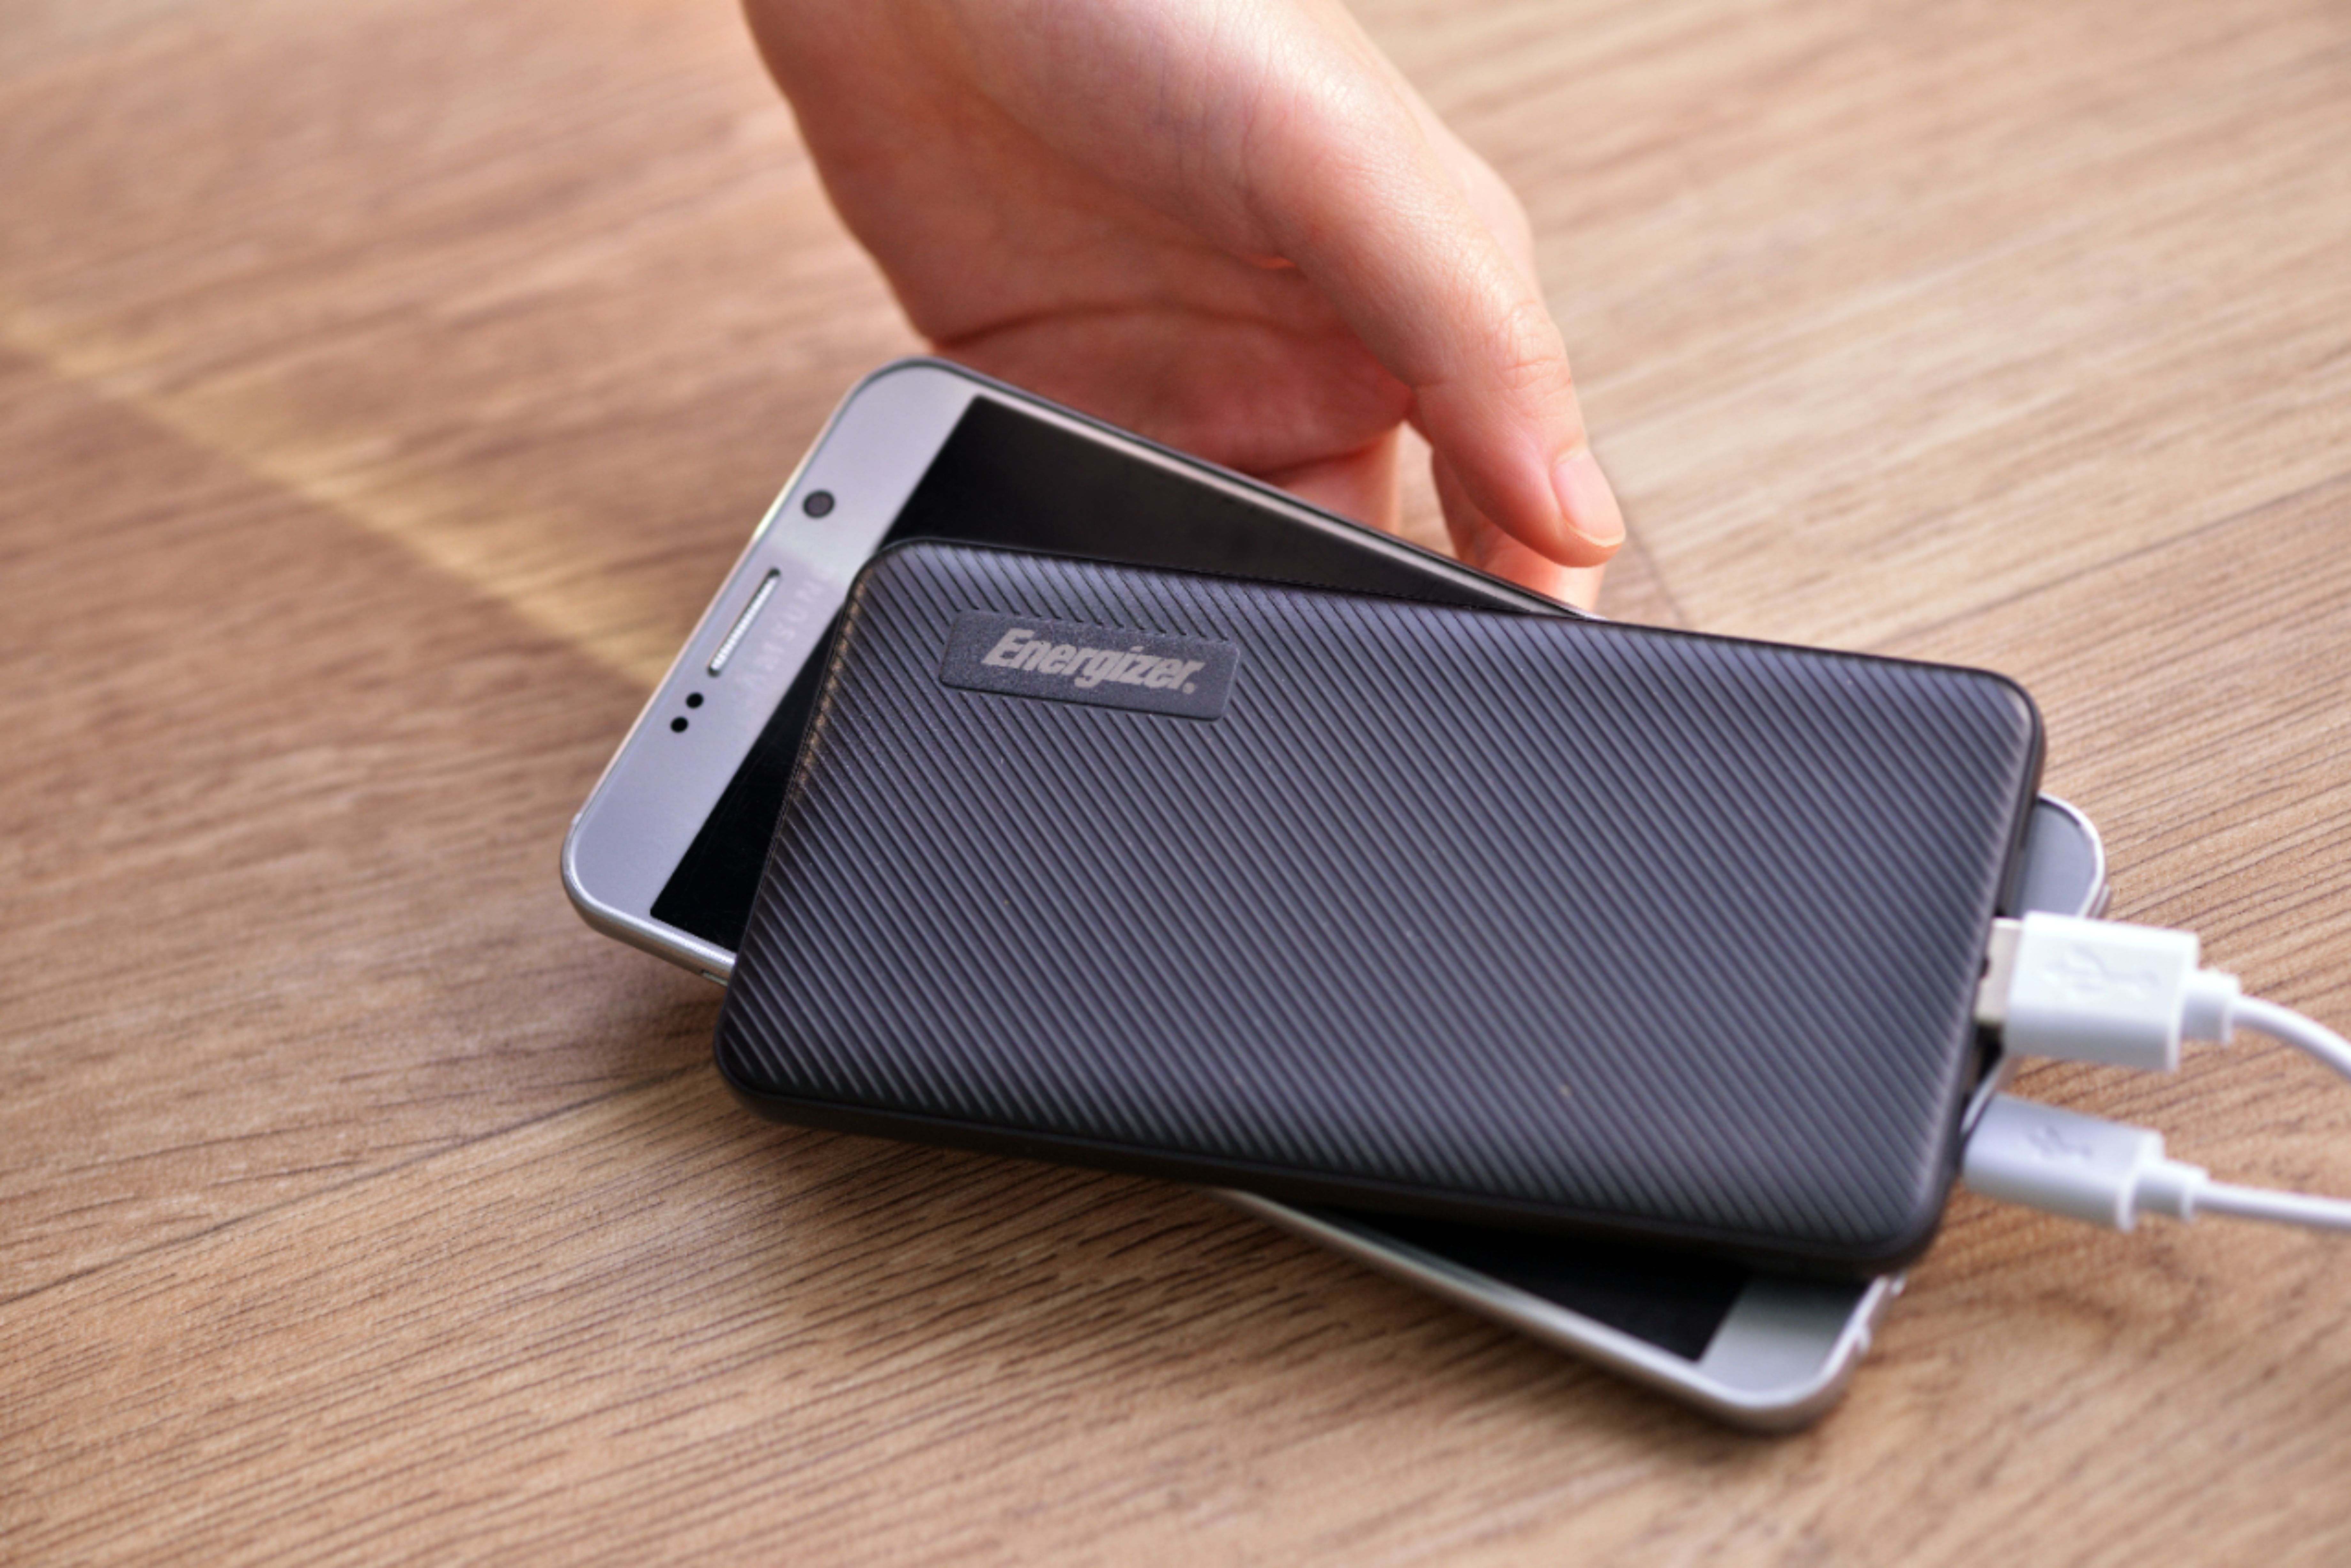 Small 5,000 mAh power bank for Apple and Android